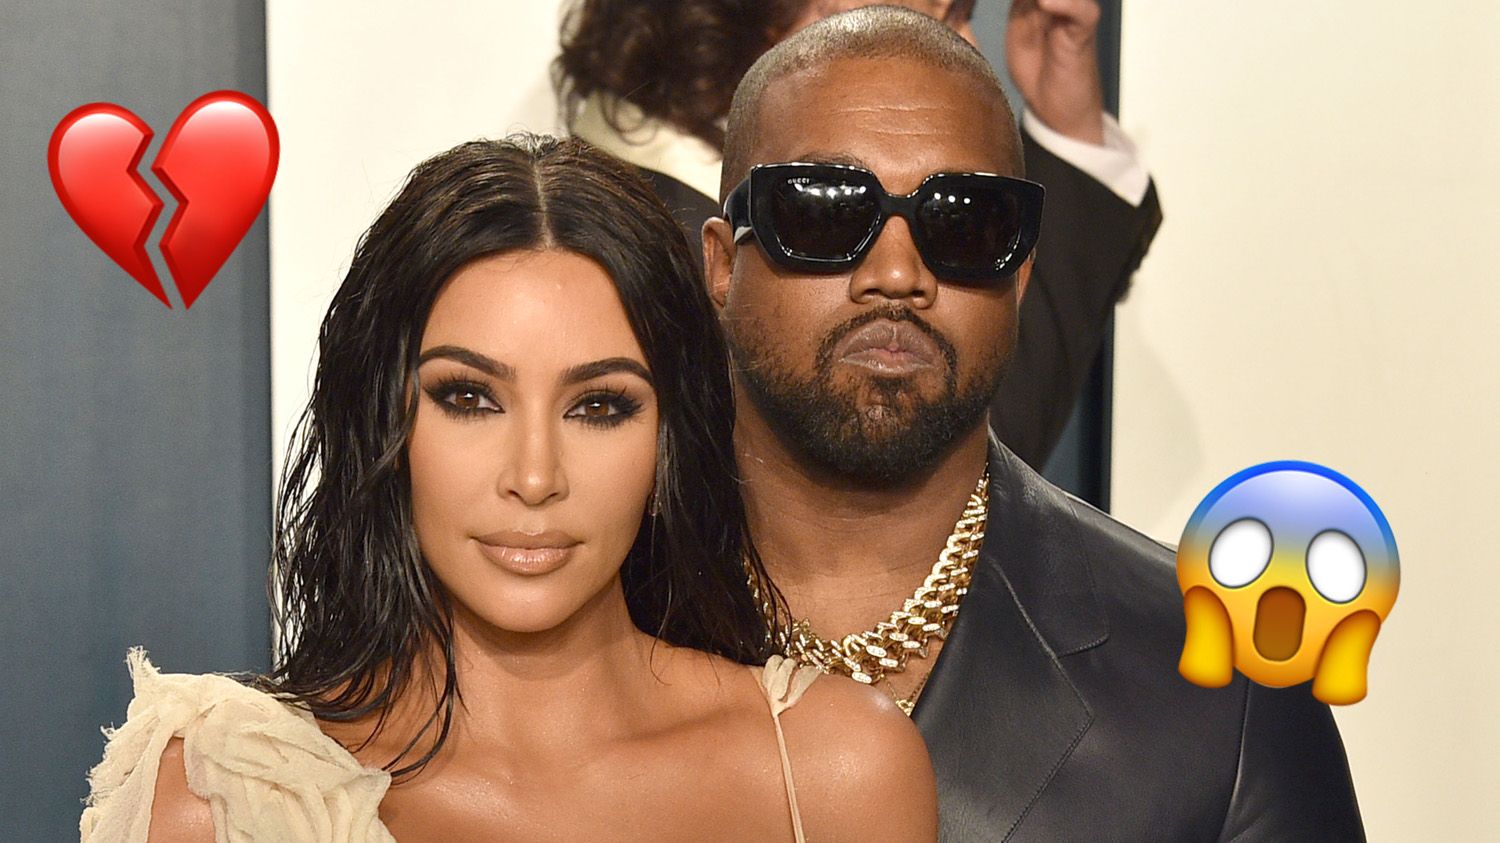 Are Kim Kardashian and Kanye West getting divorced?